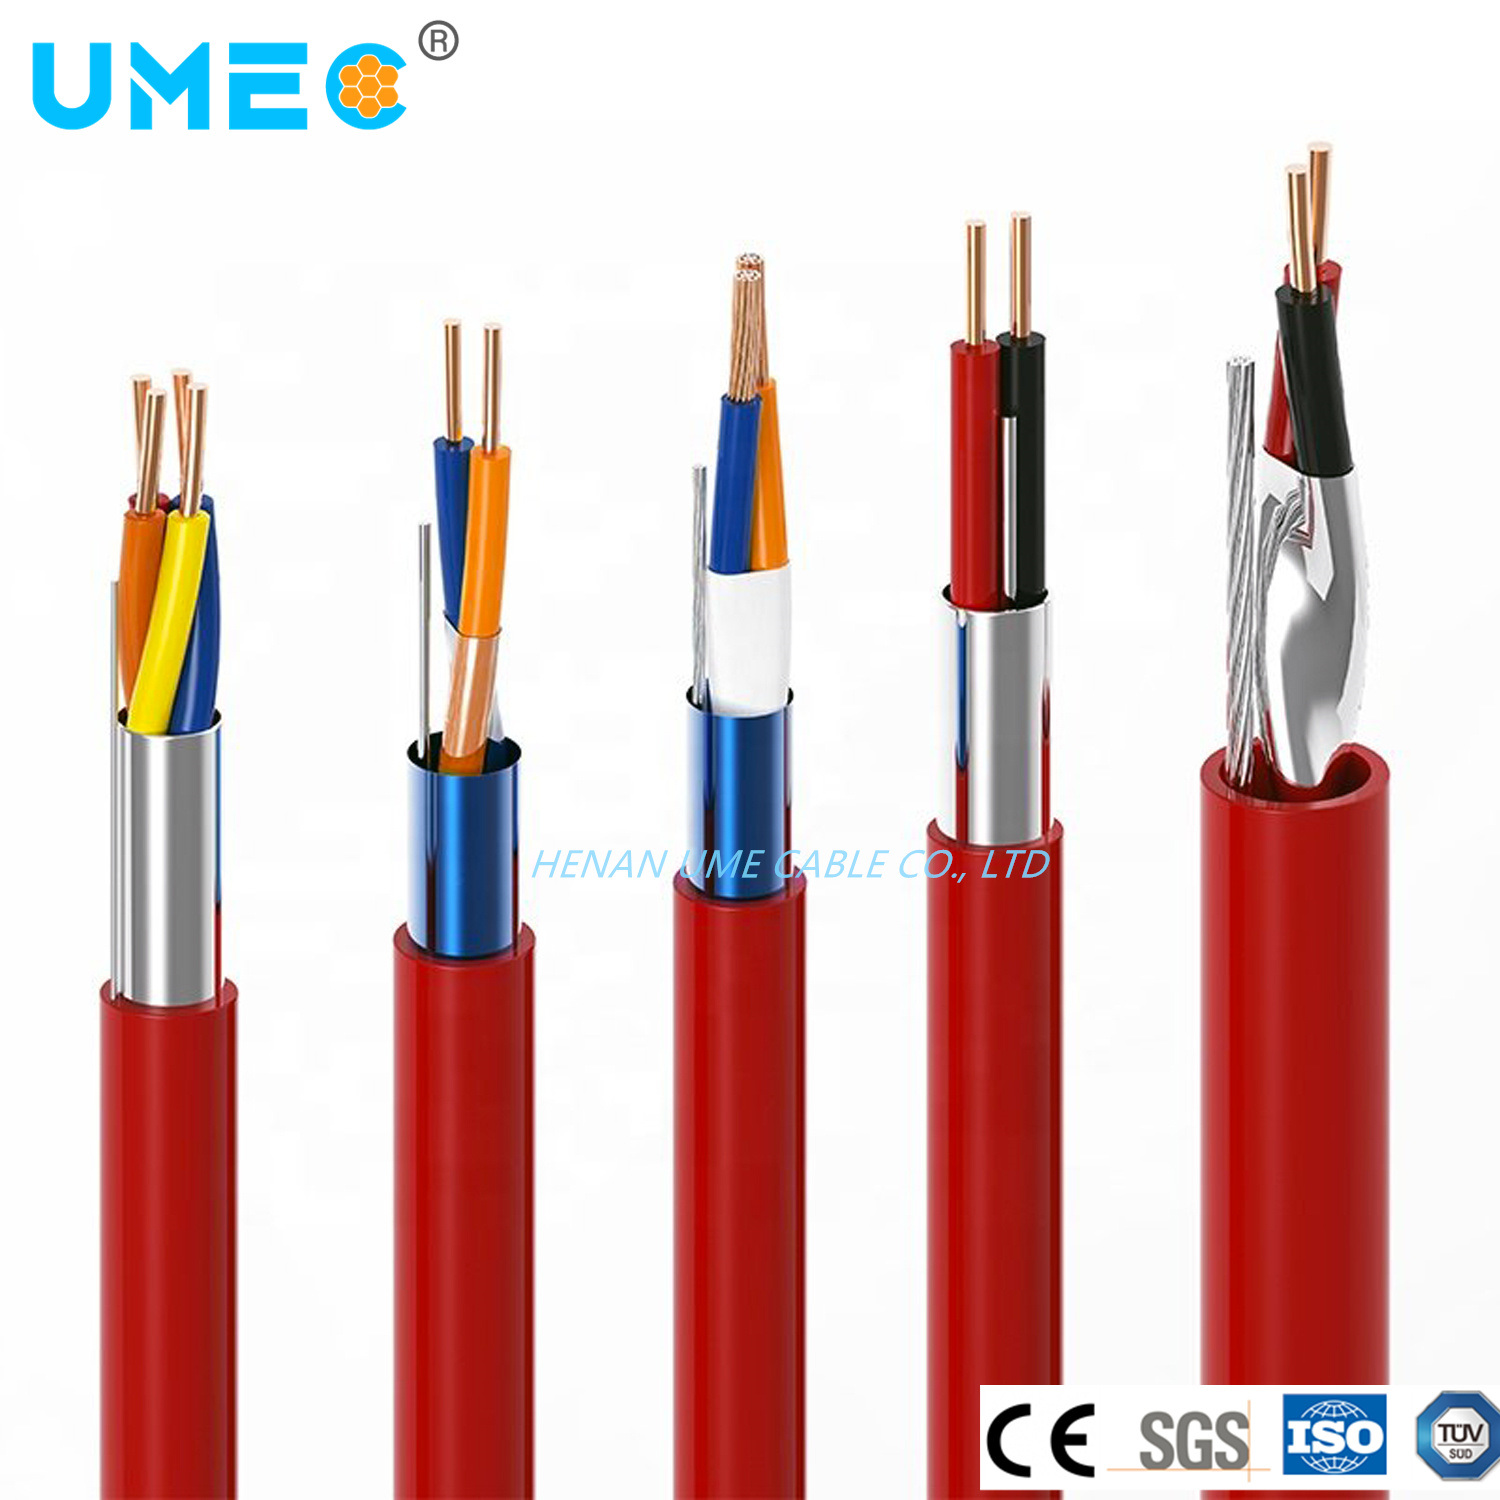 2X1.5/3X1.5mm2 Annealed Copper Conductor Fire Alarm Cable